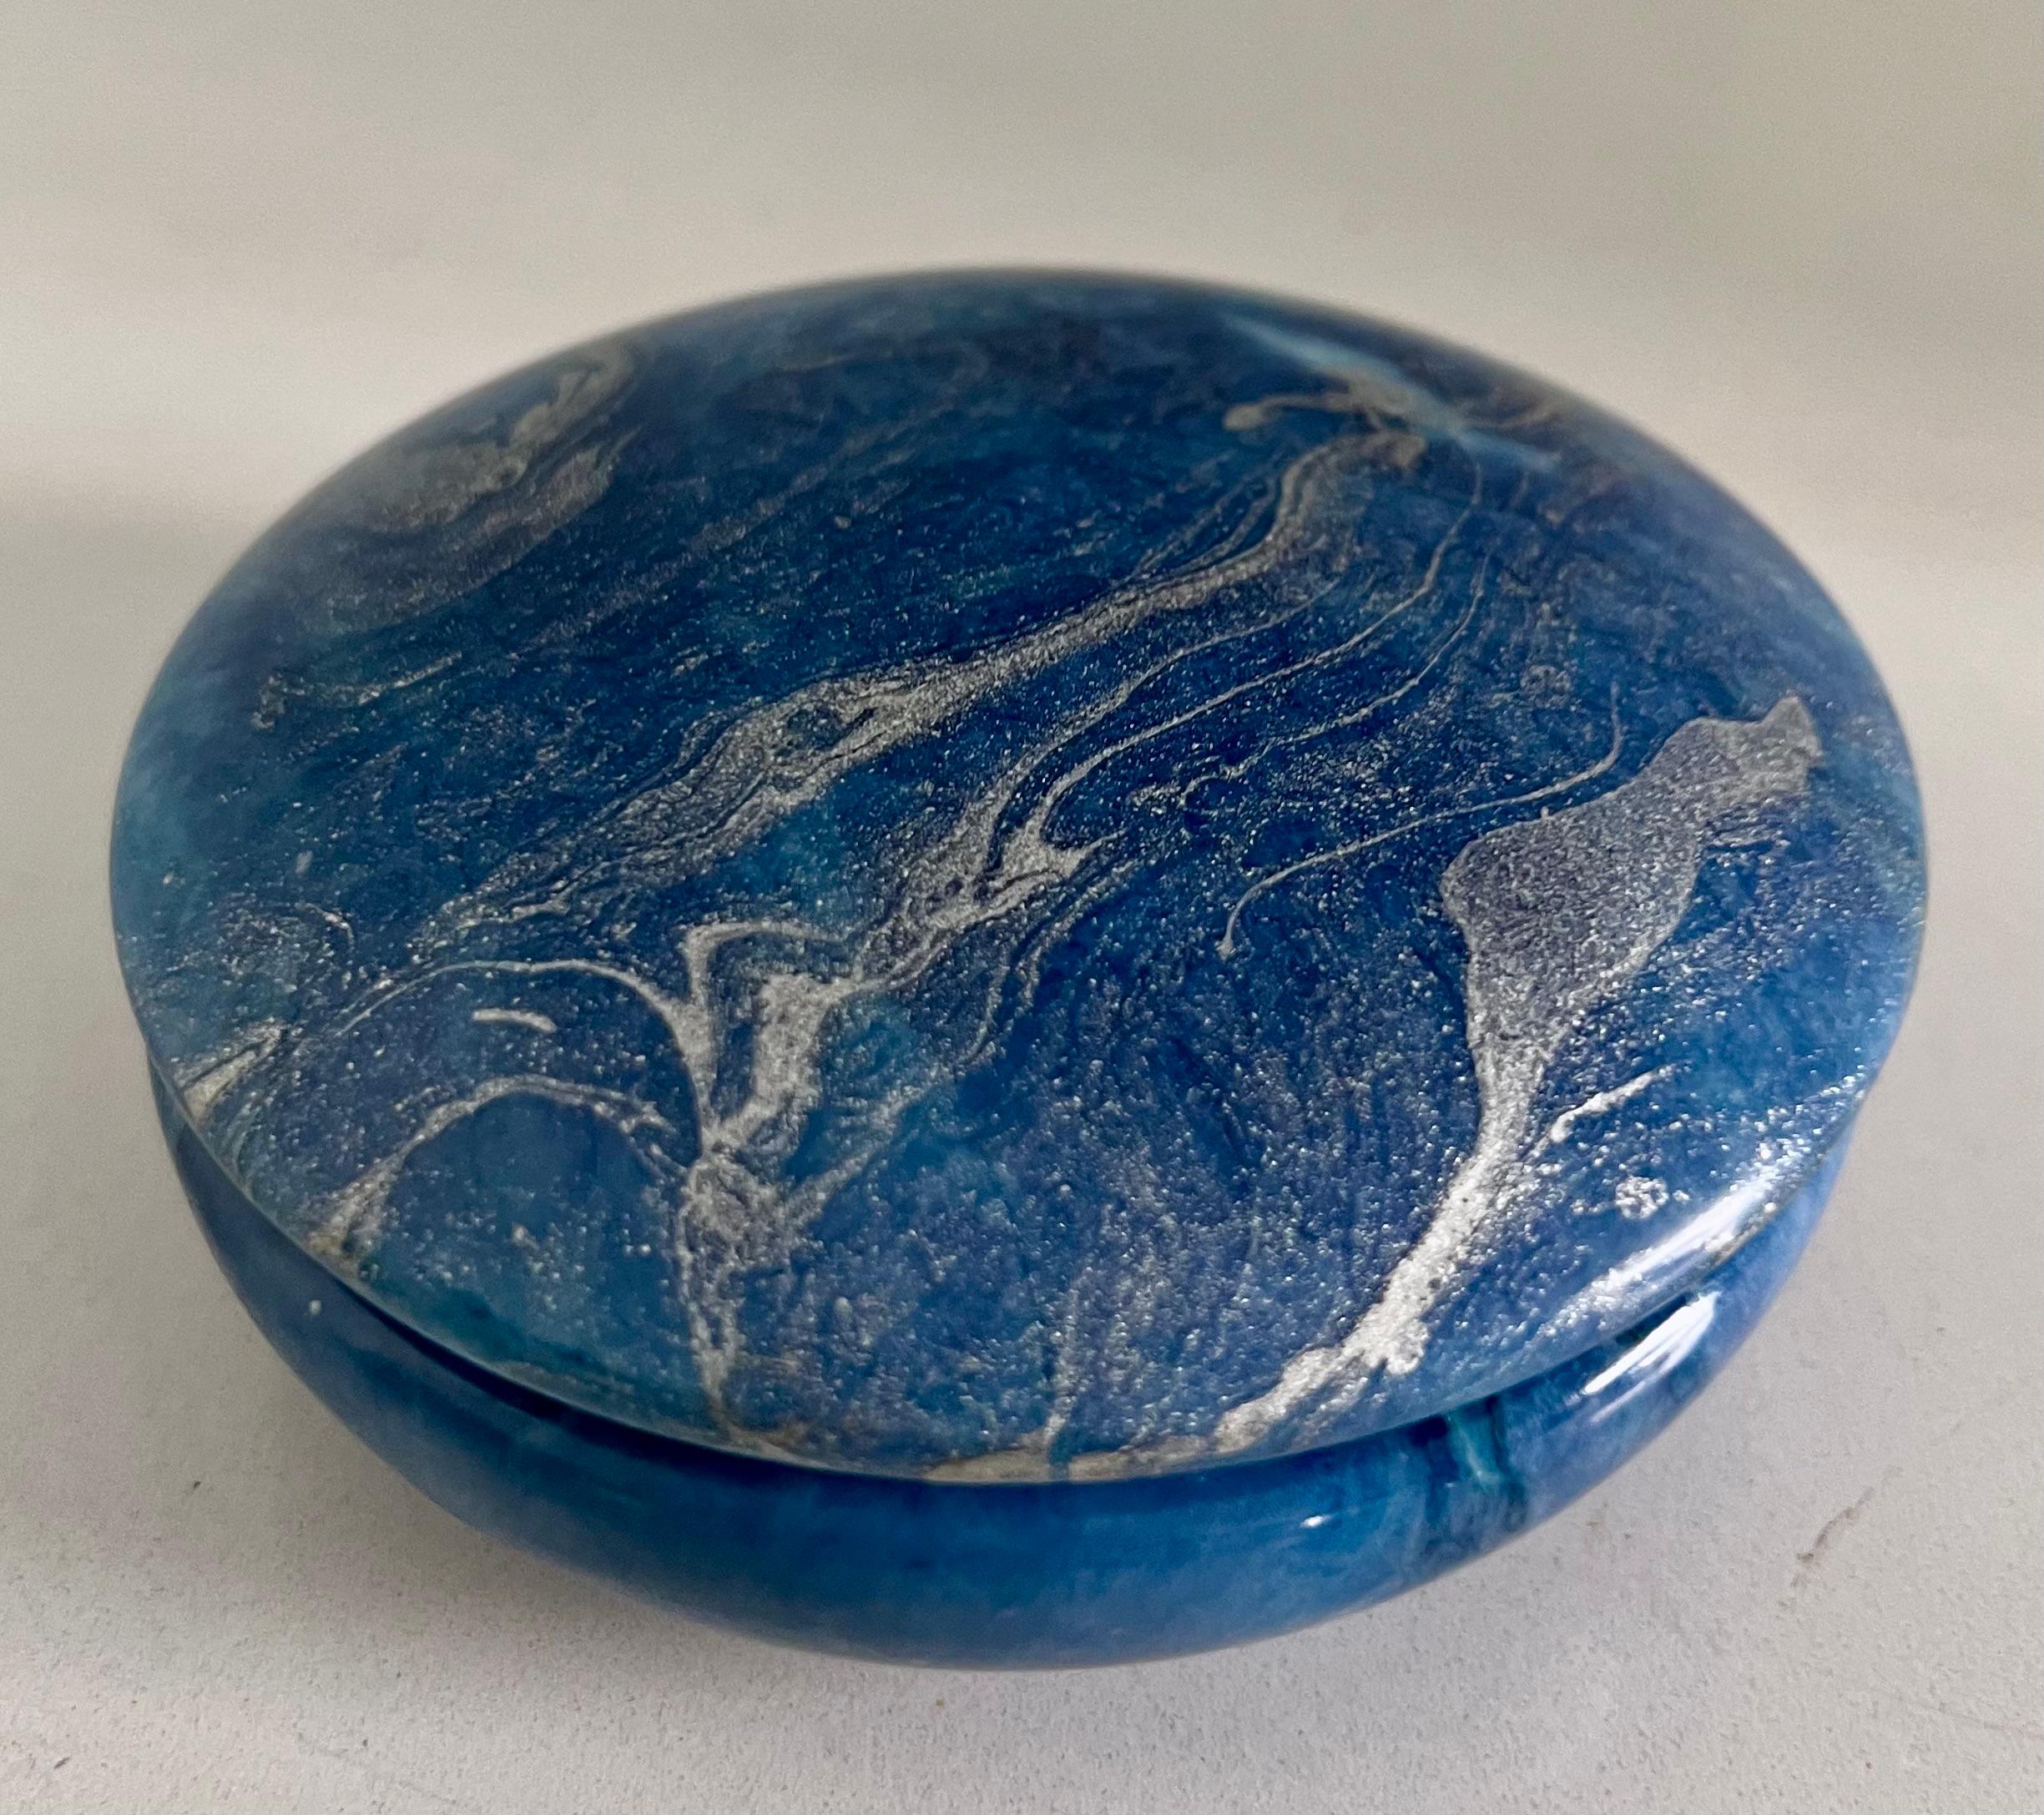 Beautiful shimmery round alabaster box with sliding lid. Unique custom blue colored box is perfect for your mementos, coins, jewelry or 420. Slide the lid shut for an elegant compliment to a bathroom, vanity, desk or work station.